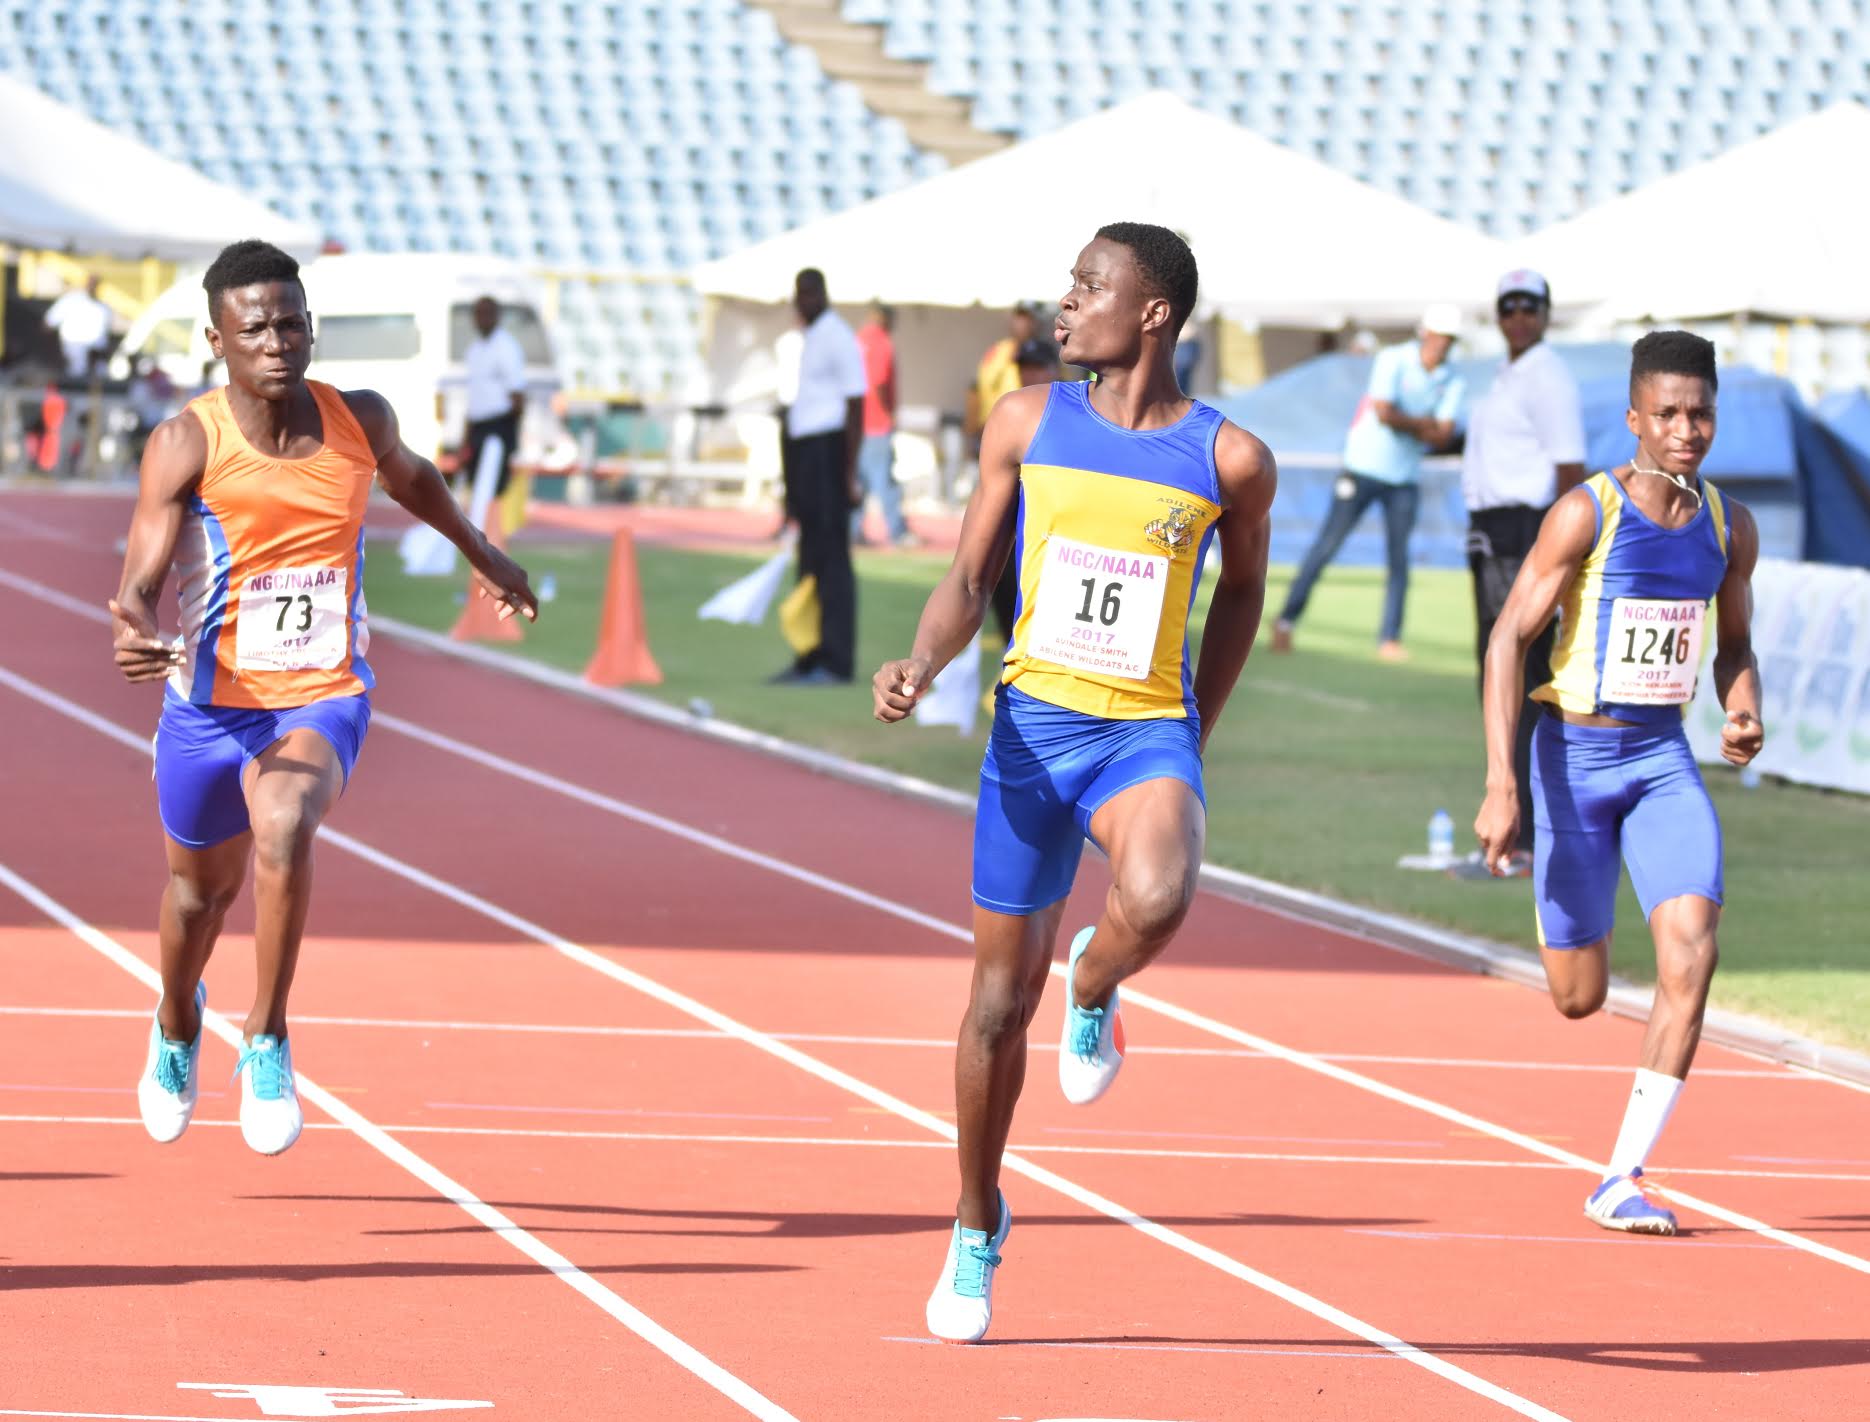 Carifta Games remains on track in Bermuda